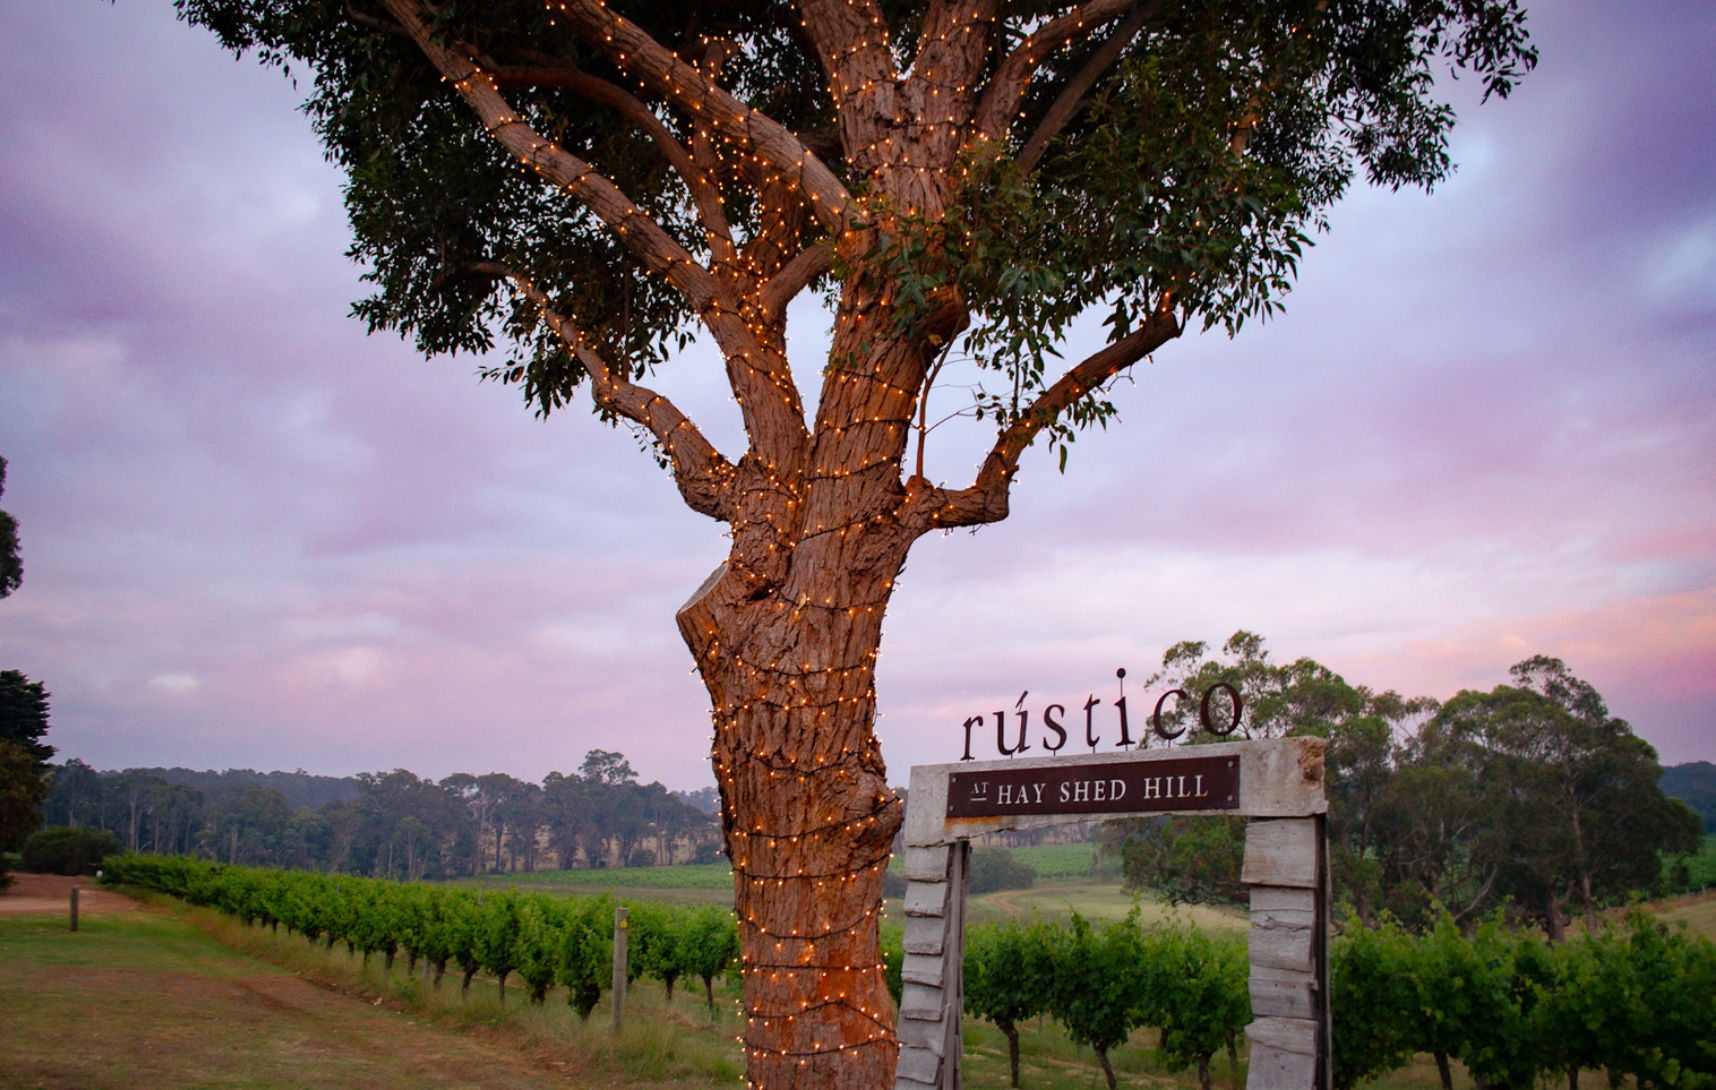 Sunset at Rustico at Hay Shed Hill